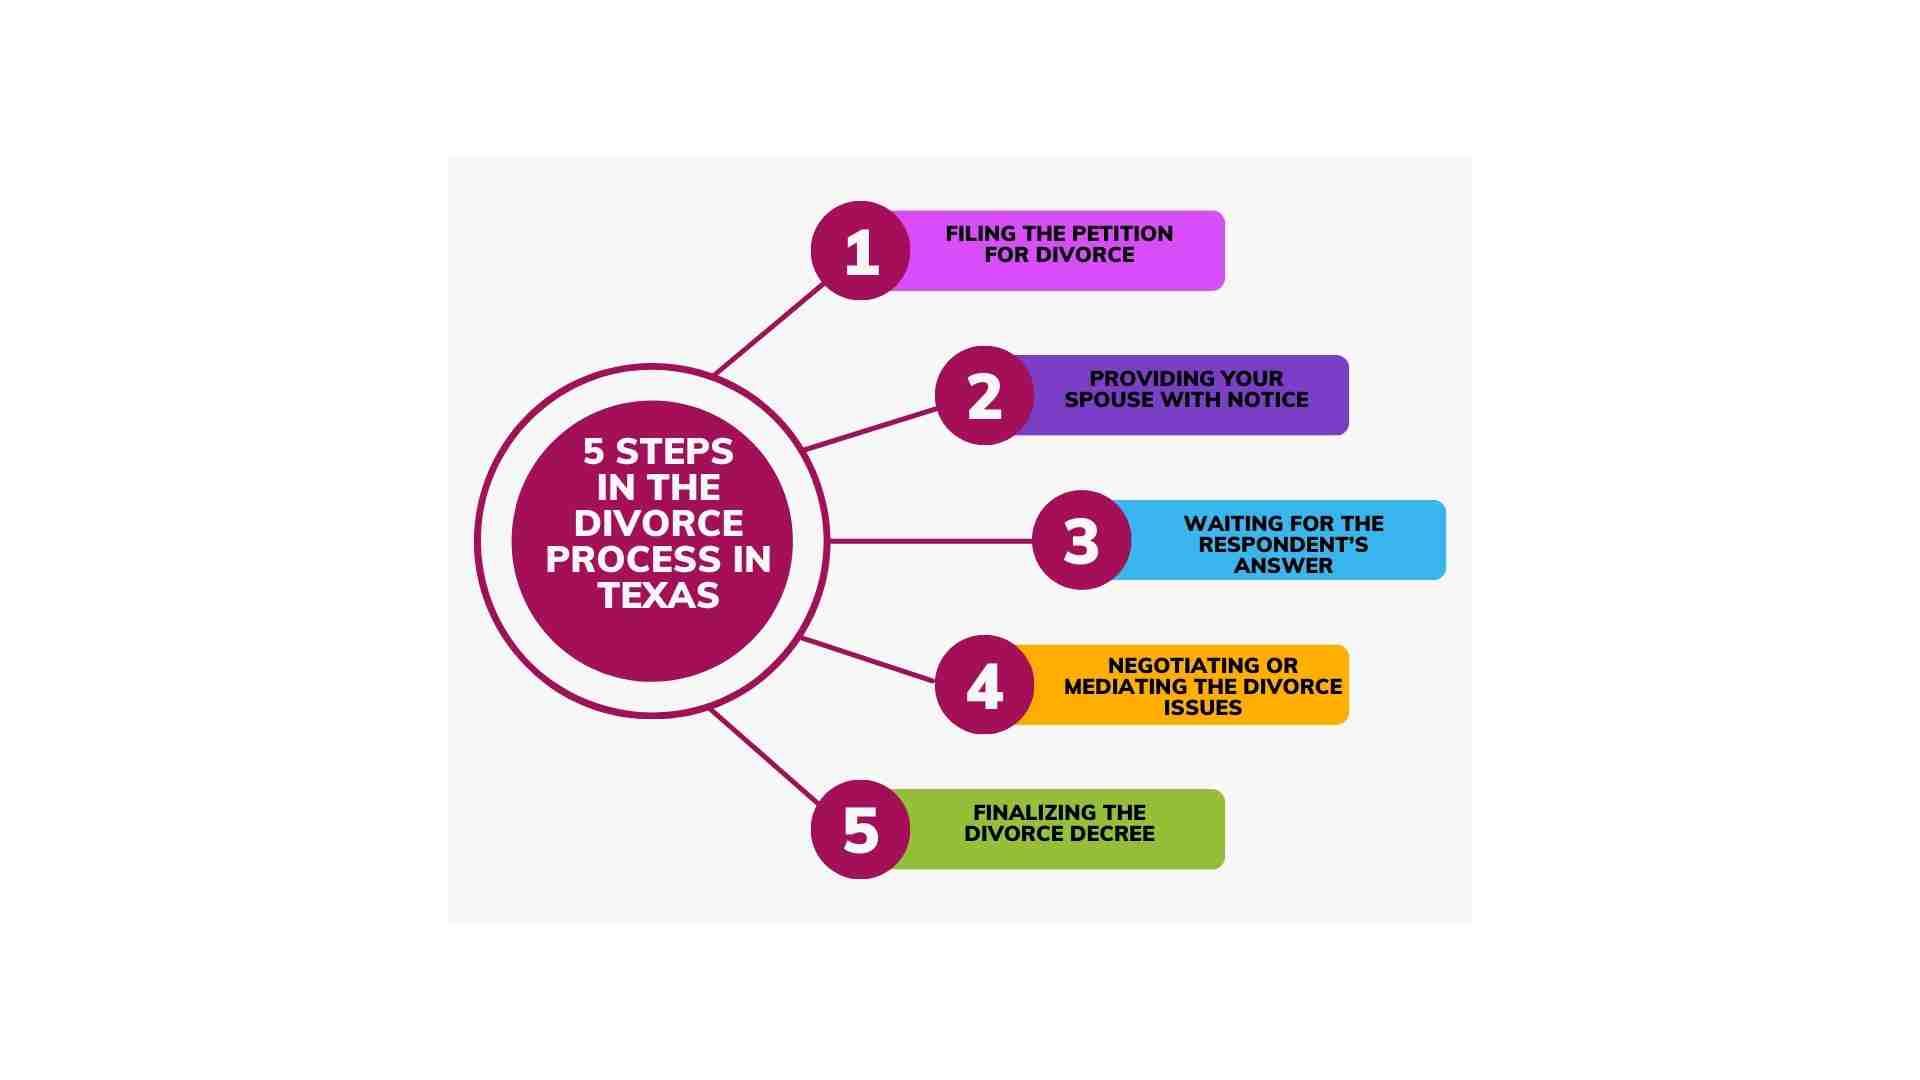 Diagram outlining the 5 steps in the Texas divorce process: filing the petition, notifying spouse, awaiting respondent's answers, negotiating/mediating issues, and finalizing the uncontested divorce decree.